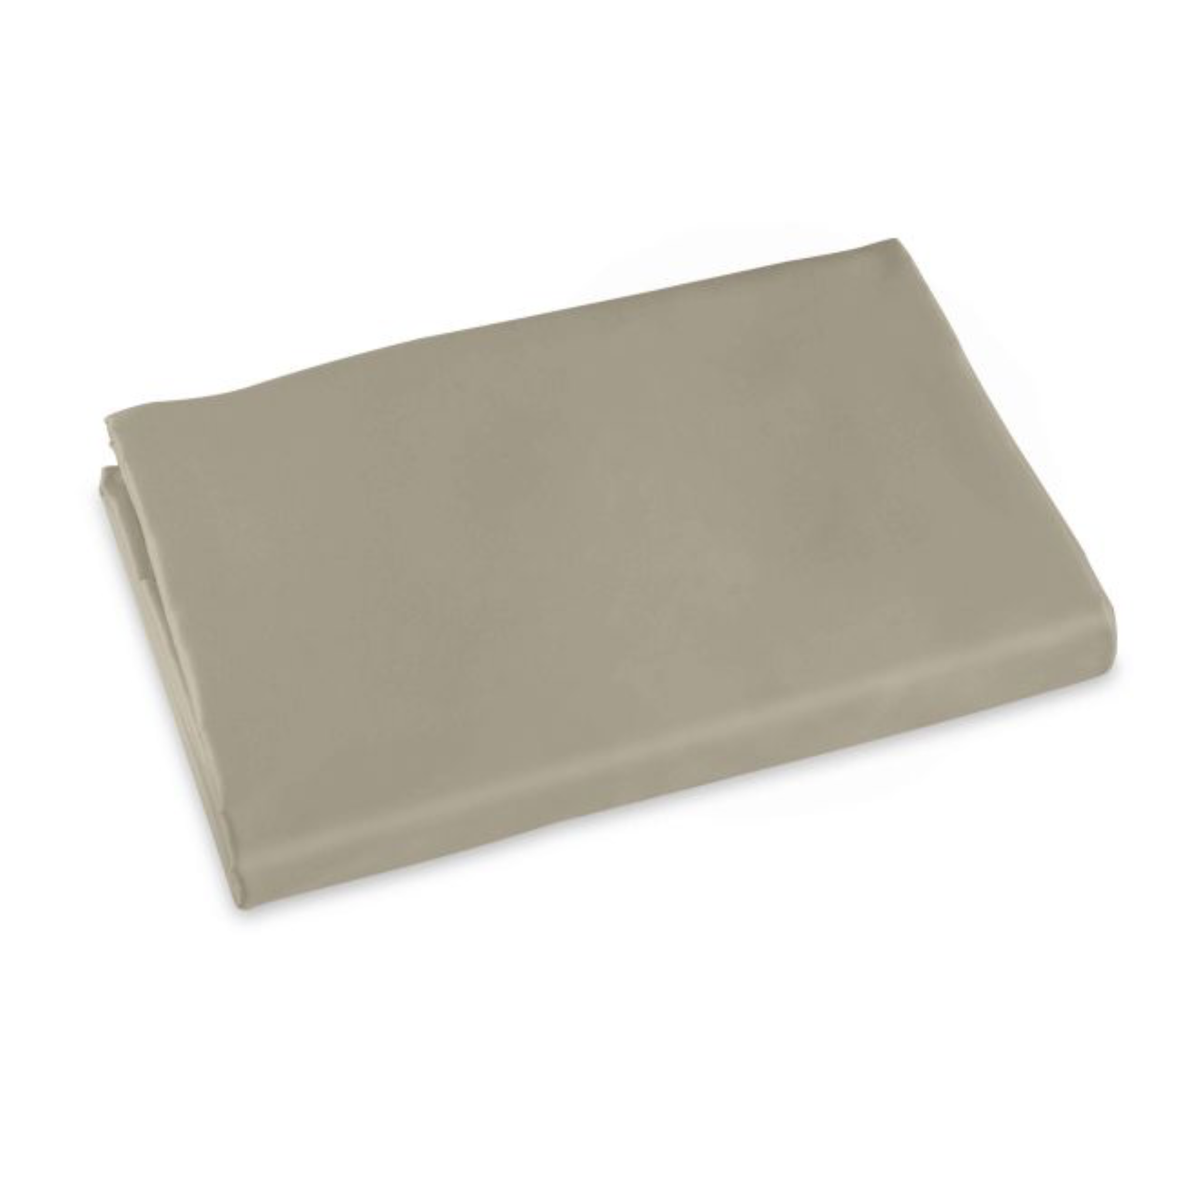 Folded Fitted Sheet of Signoria Gemma Bedding in Khaki Color